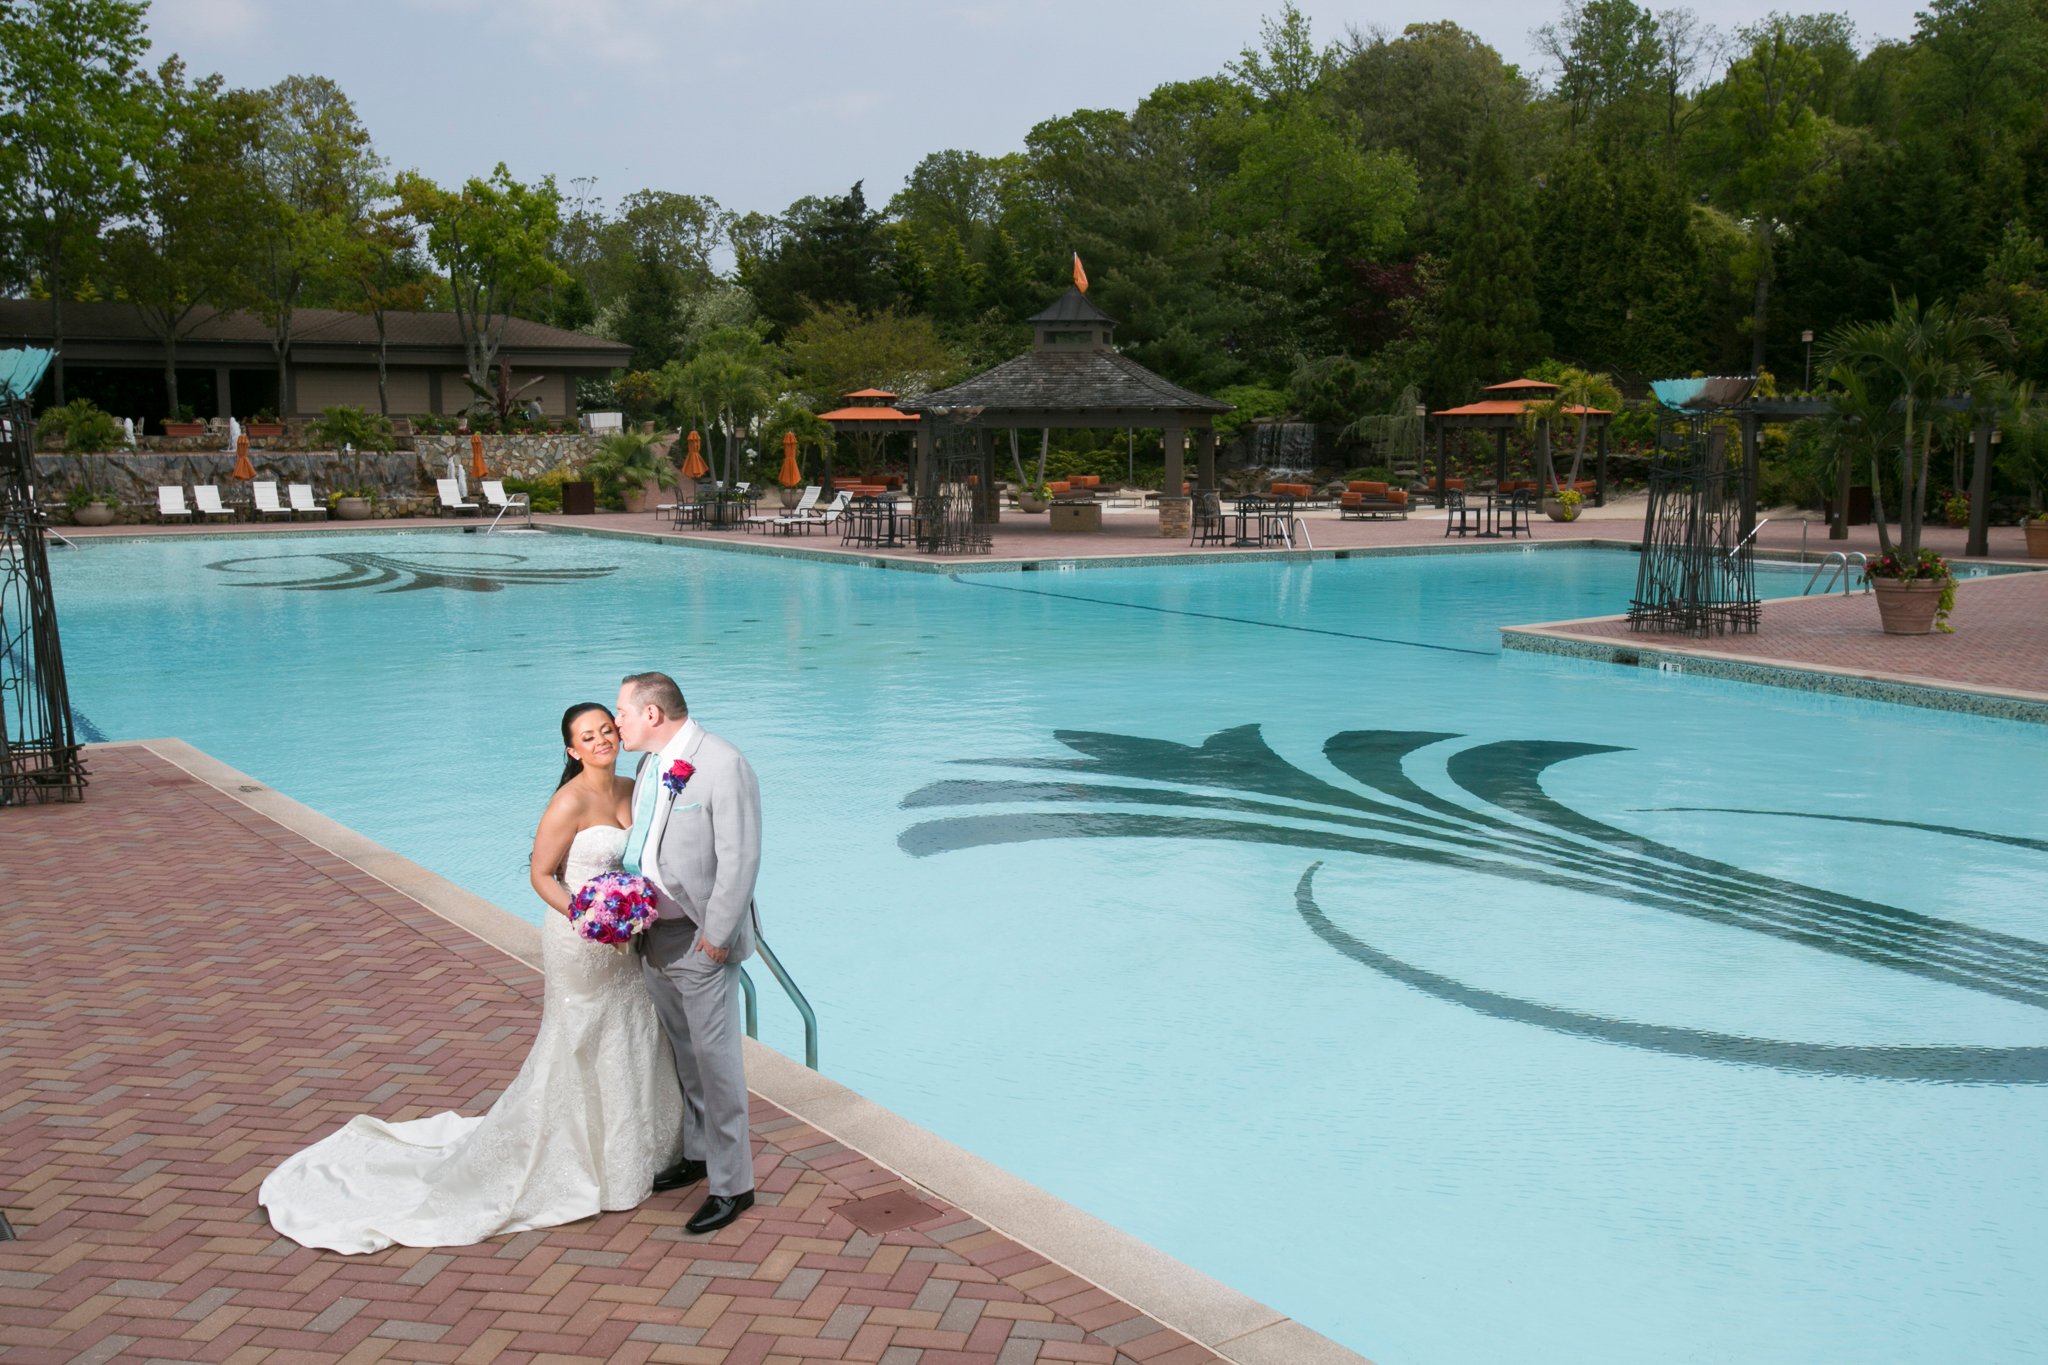 Poolside at Crest Hollow Wedding Photos-1-2